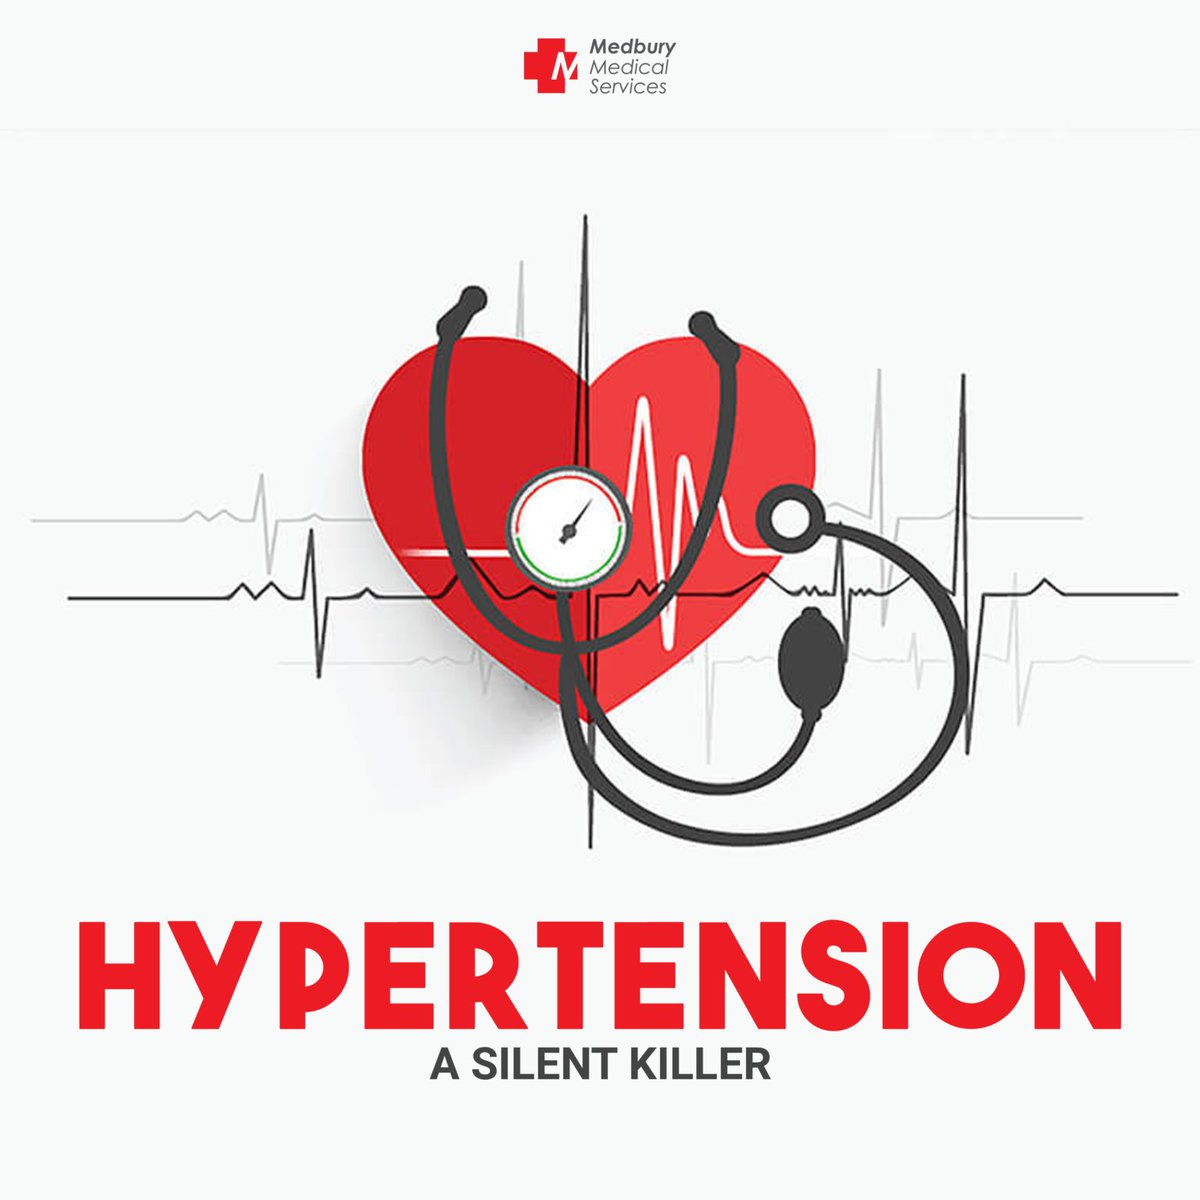 'I am too young to have hypertension.' ⚠️ This is a very dangerous and false statement - Recent studies have shown an alarming increase in young people developing high blood pressure ‼️ Blood pressure screening is essential for individuals of all ages!! #WorldHypertensionDay